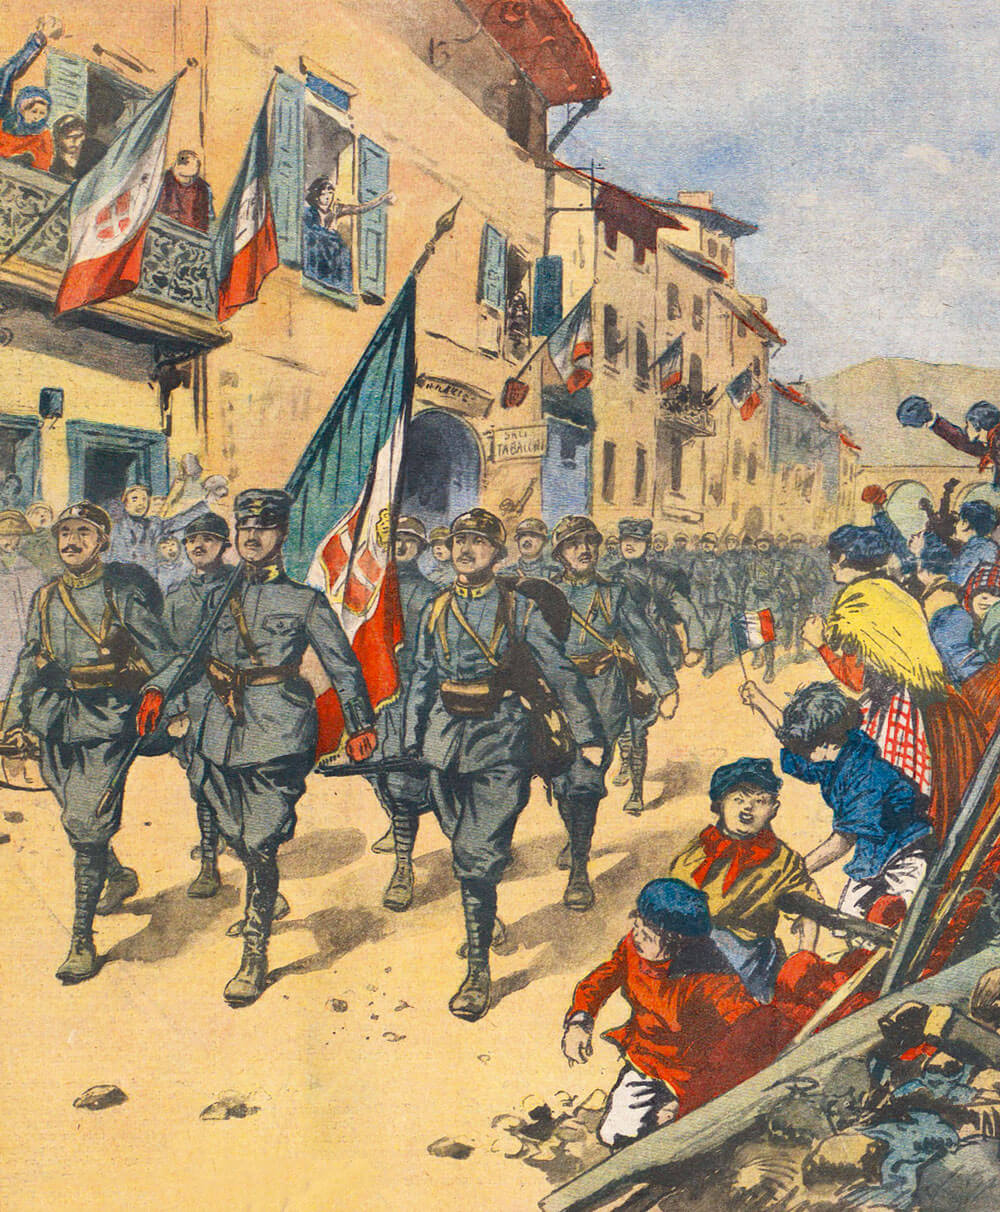 Italian troops entering Fiume after D’Annunzio’s defeat, December 1920. This image from Le Petit Journal of 9 January 1921 was captioned, “The end of the adventure.”